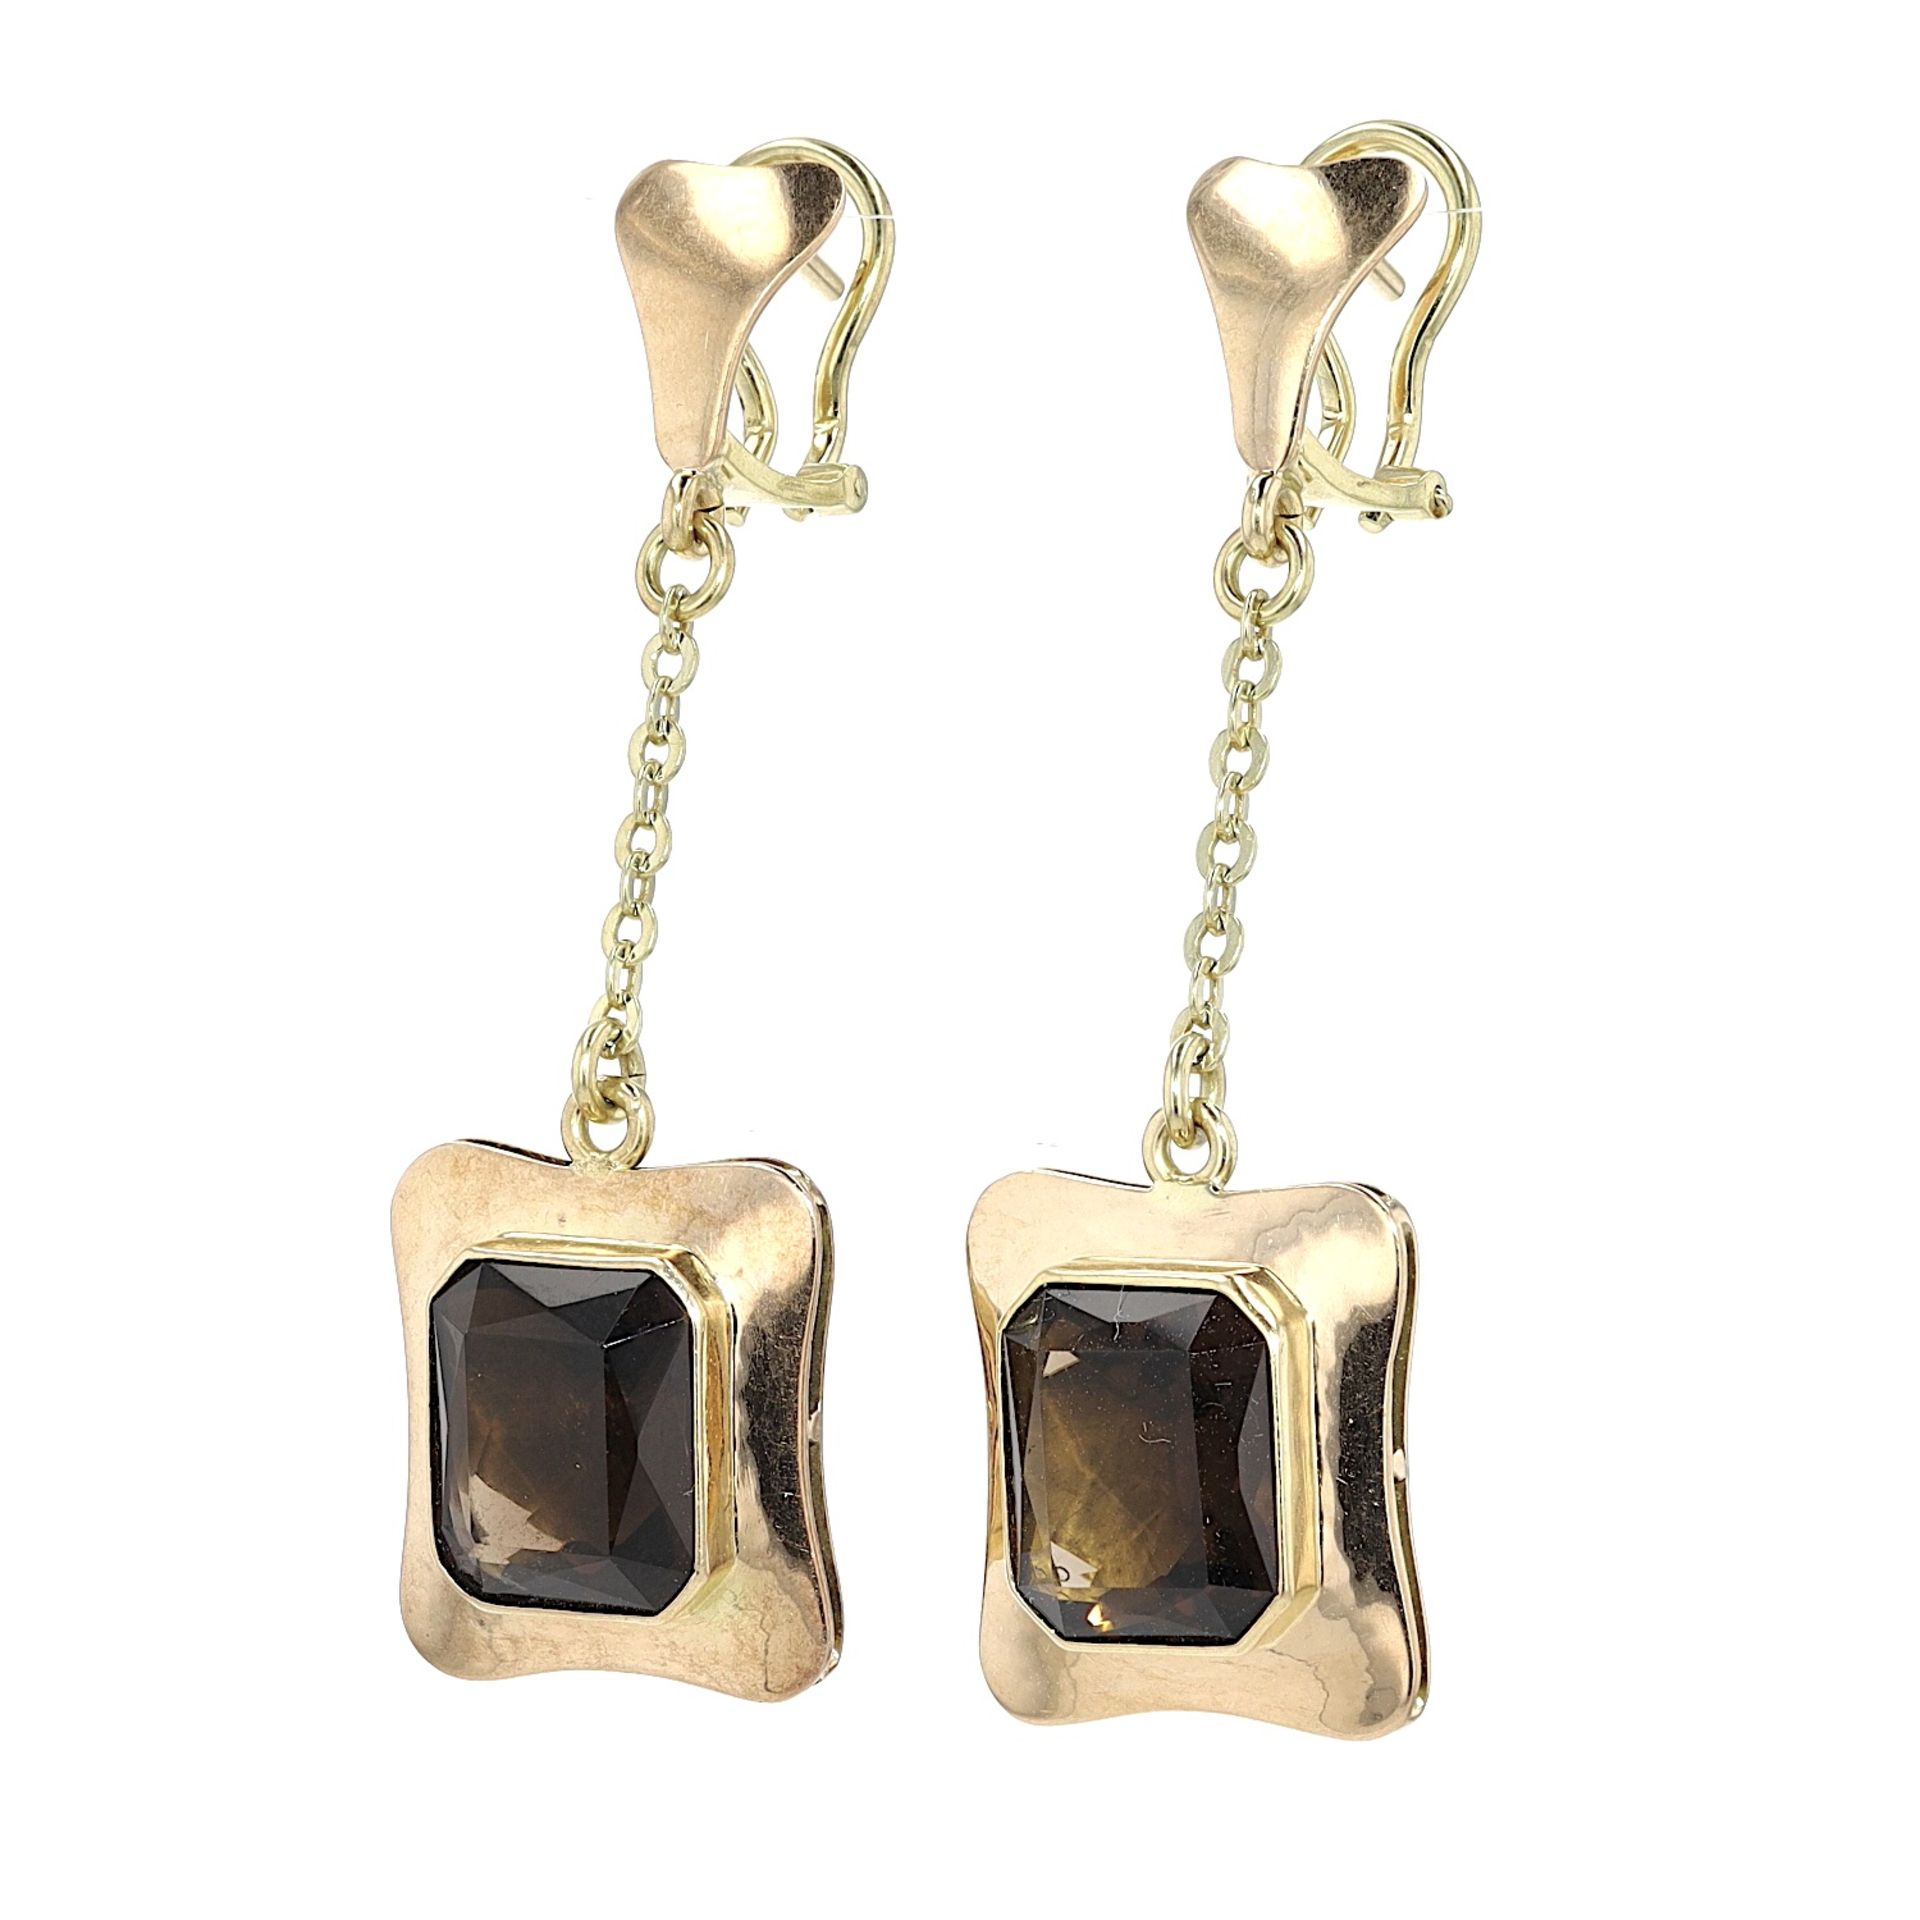 1 pair of 585 gold earrings with smoky quartz - Image 2 of 4